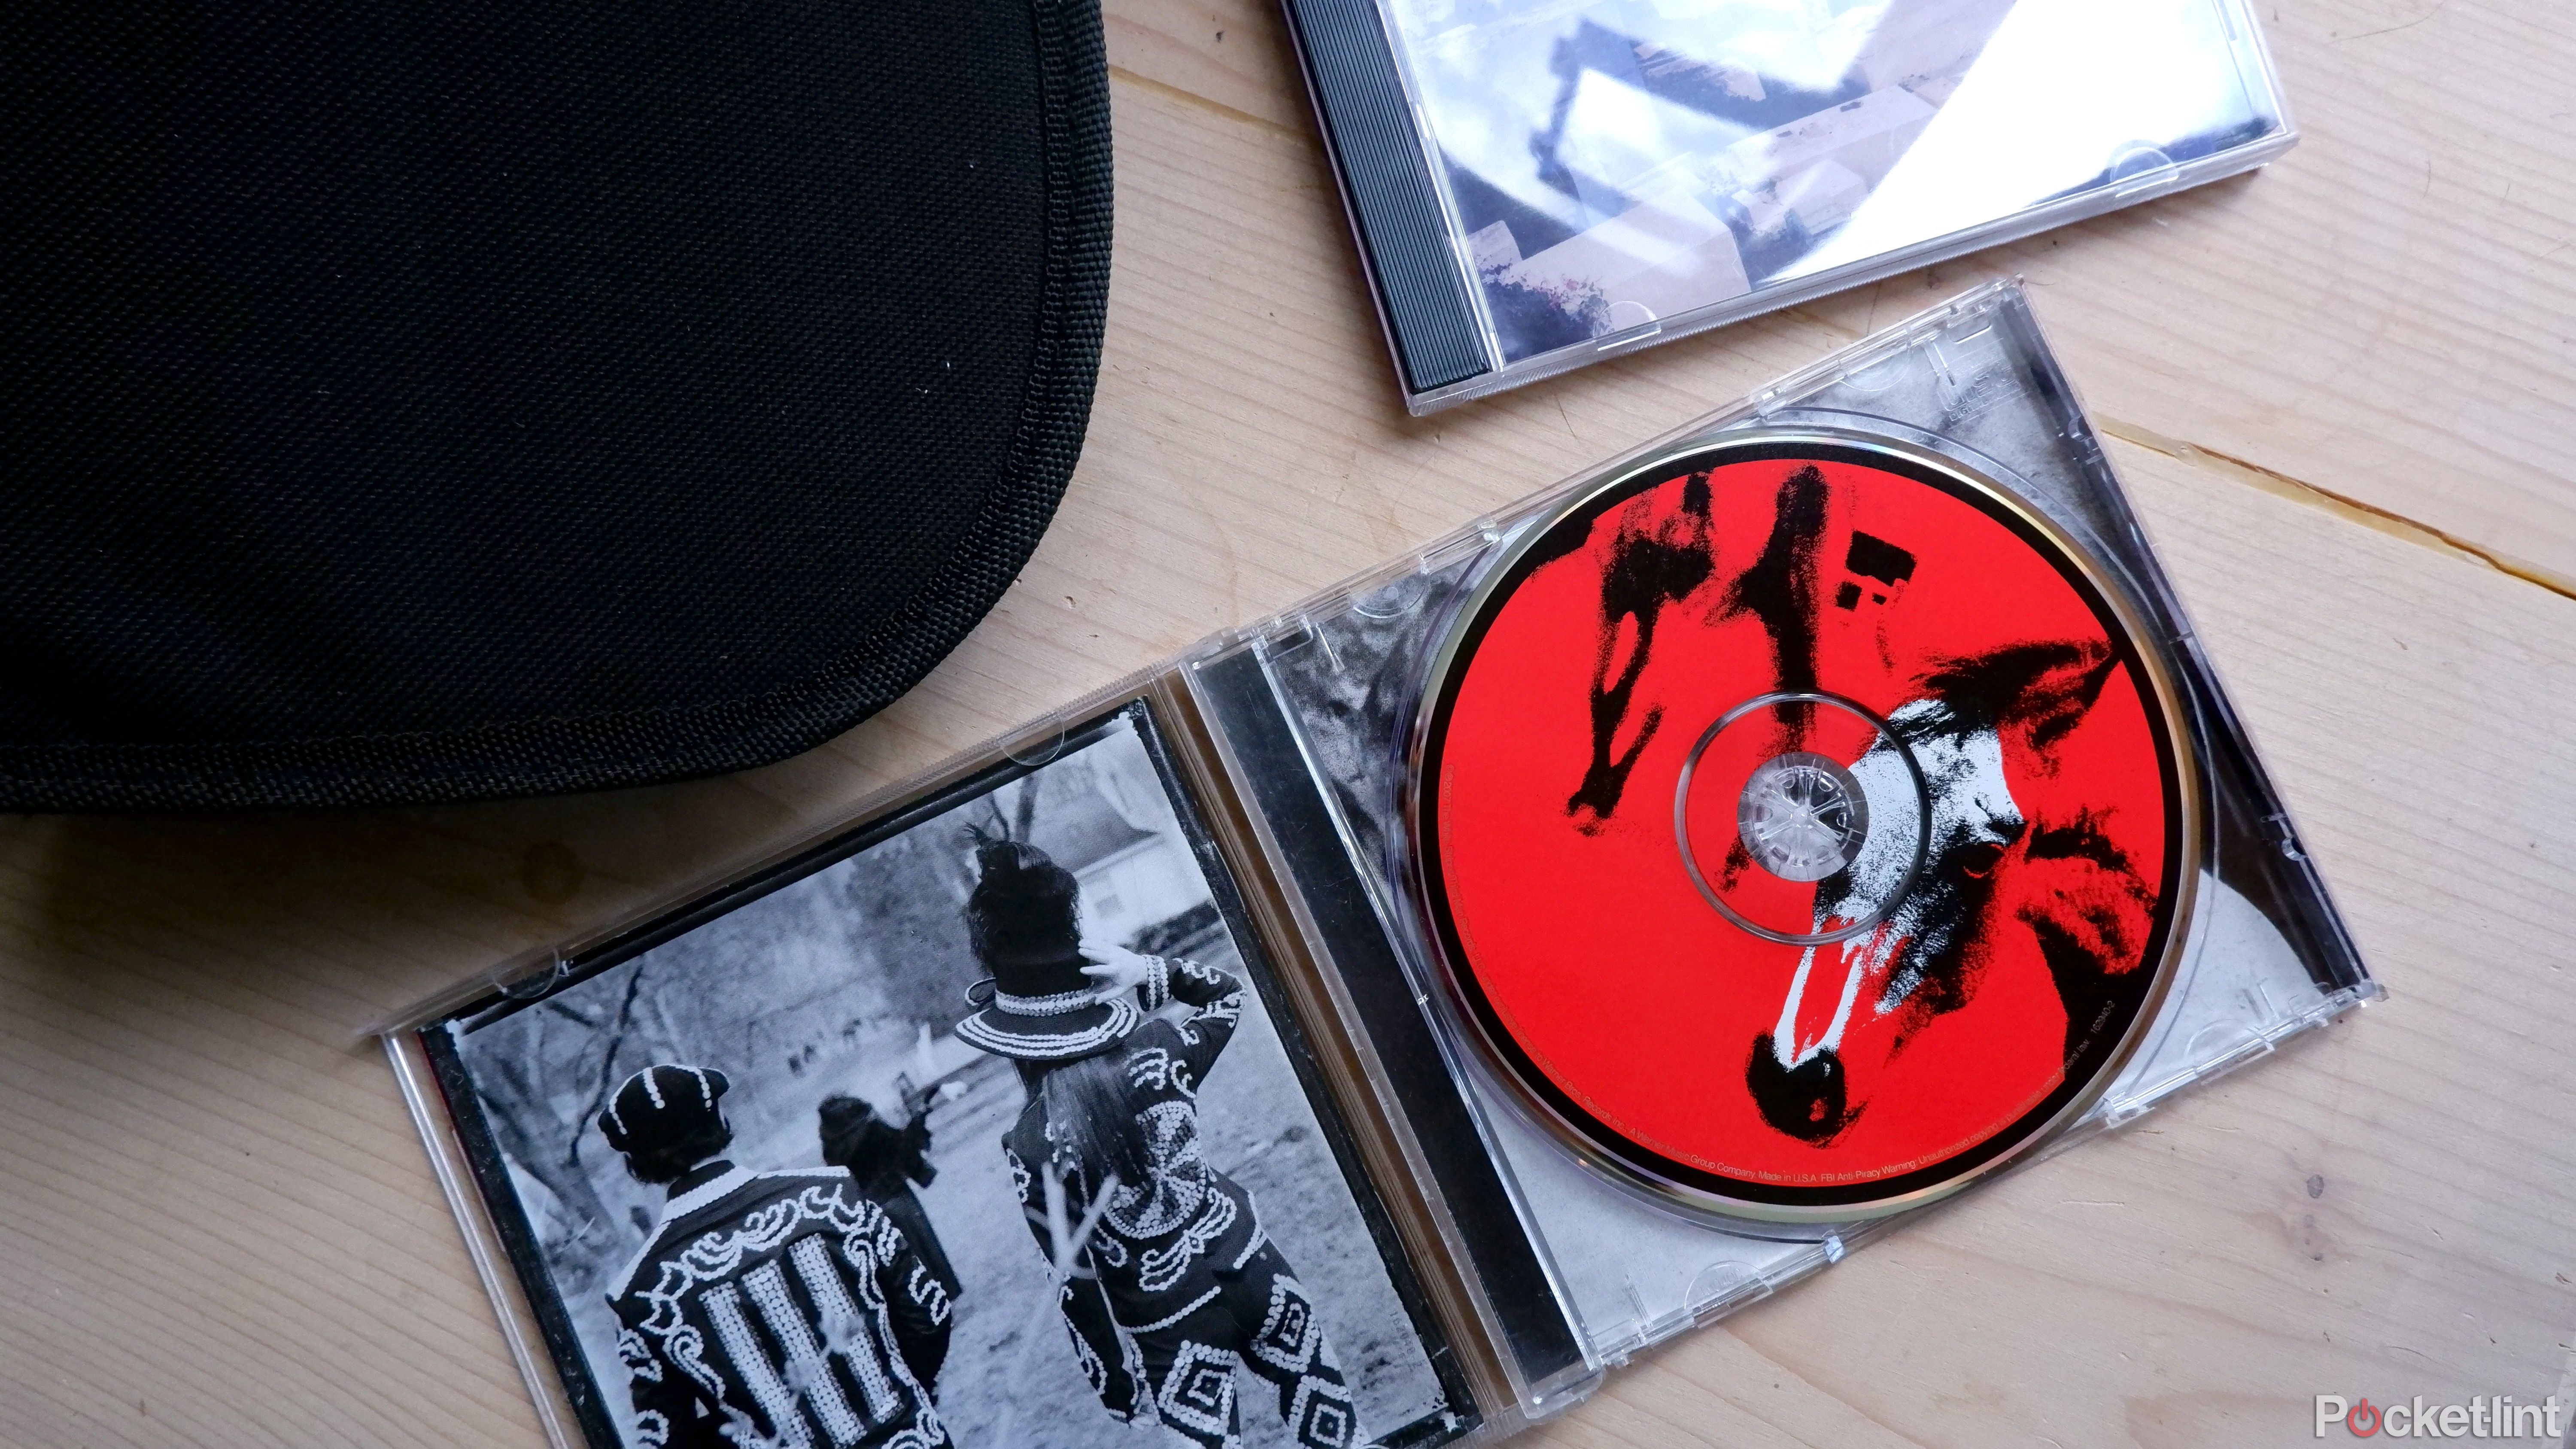 An open CD case, a travel case, and a closed CD case laid out on a wooden surface